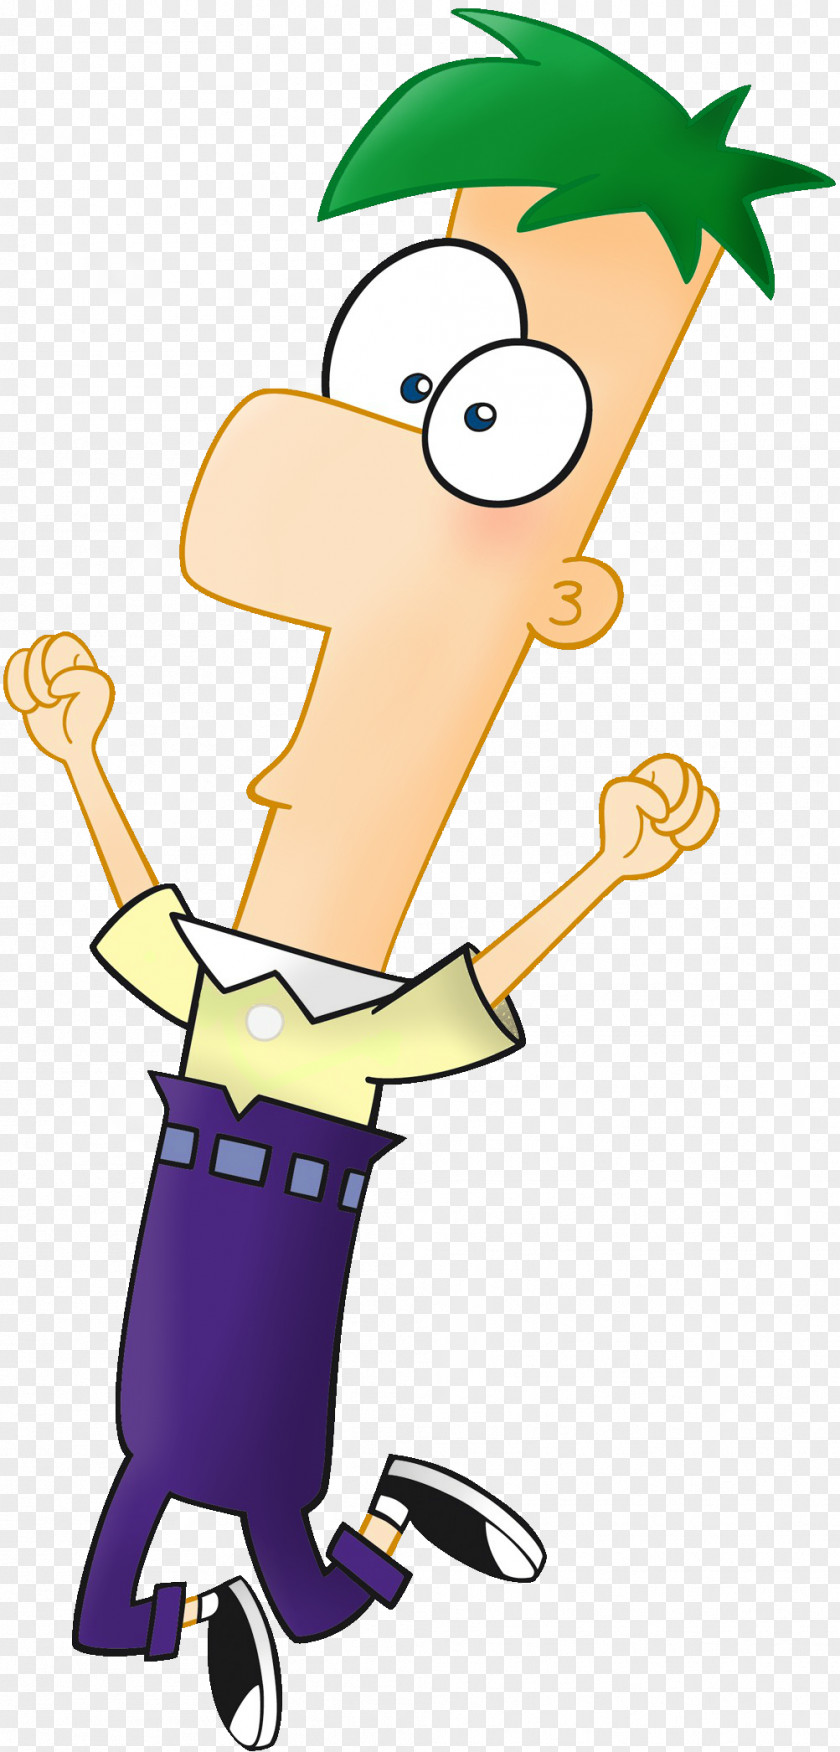 FERB Phineas Flynn Ferb Fletcher Character Drawing PNG